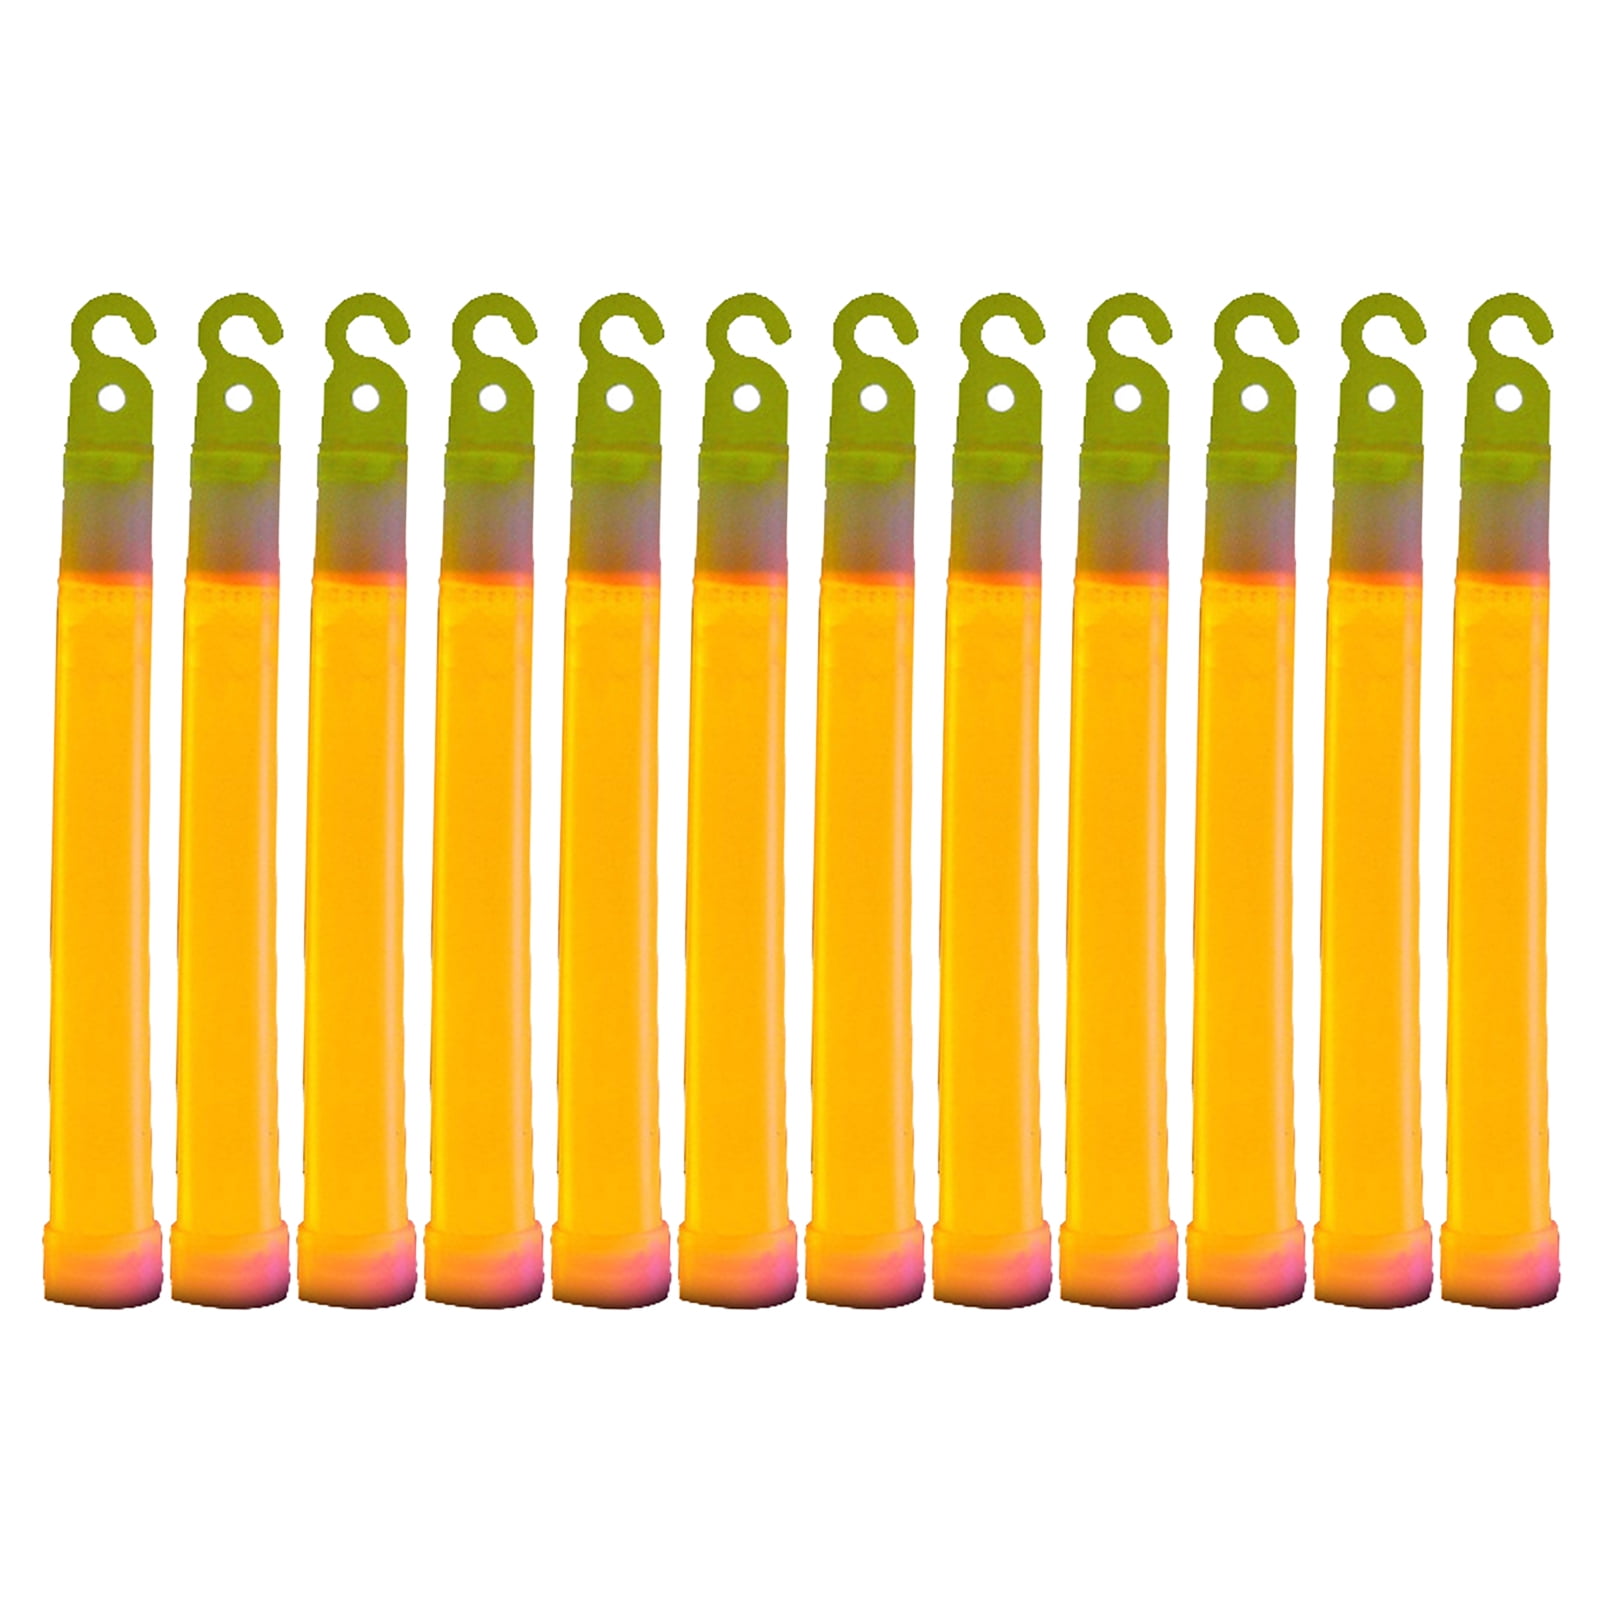 32 Glow Sticks Ultra Bright 6 Inch Large Glow Stick - Chem Light Sticks  with 12 Hour Duration - Camping Glow Sticks - Glowsticks for Parties and  Kids (Colorful) 